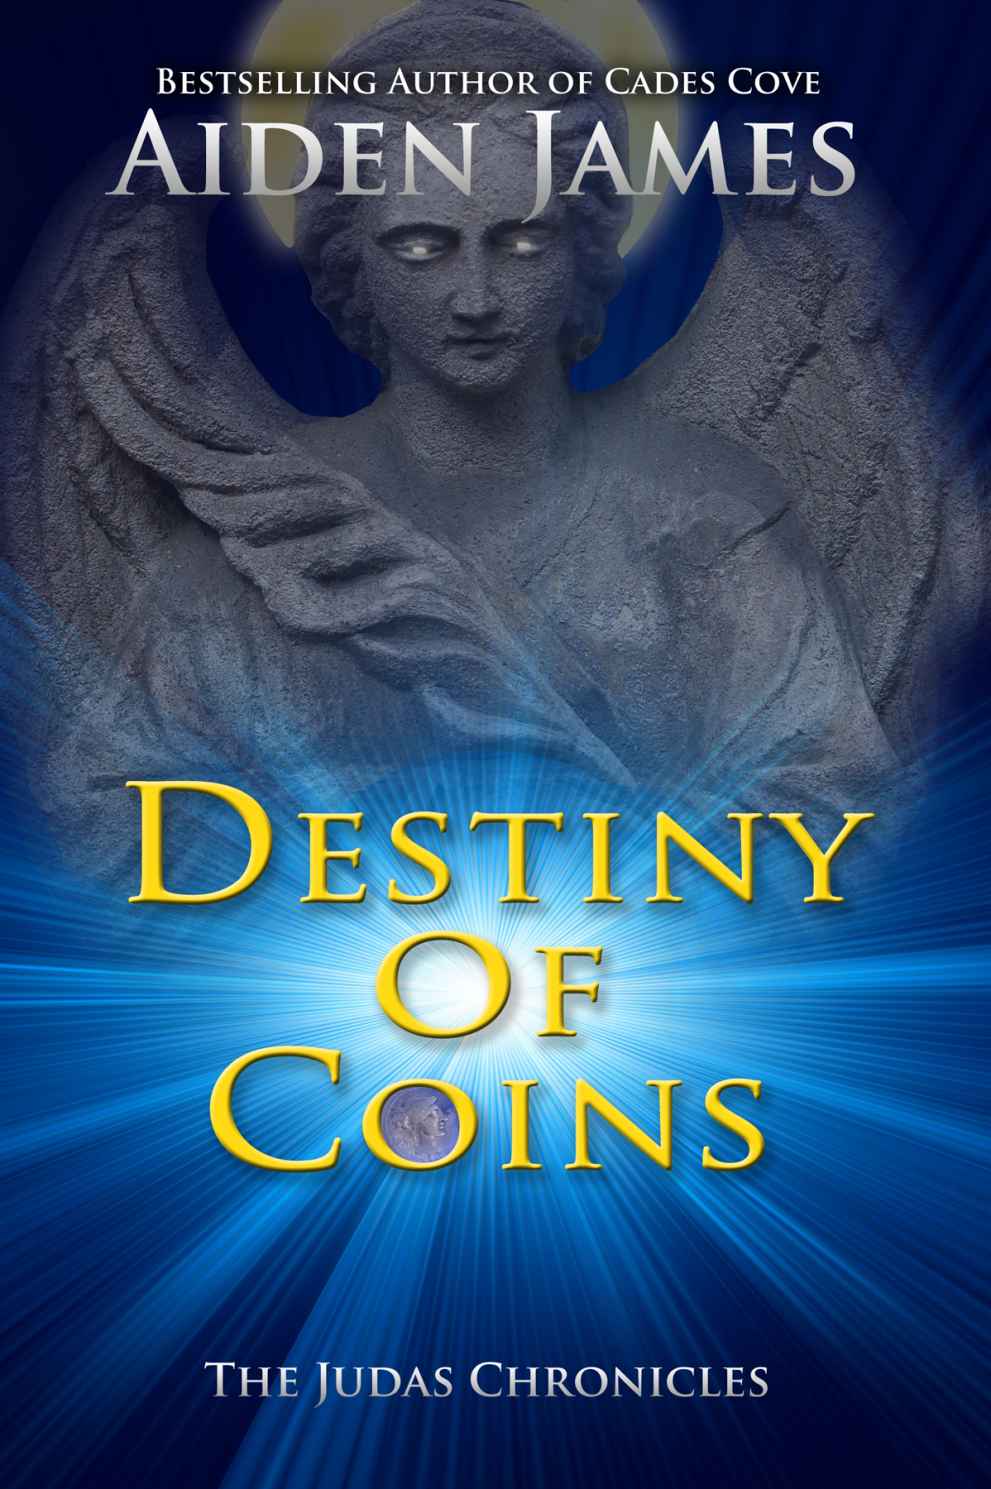 Destiny of Coins by Aiden James